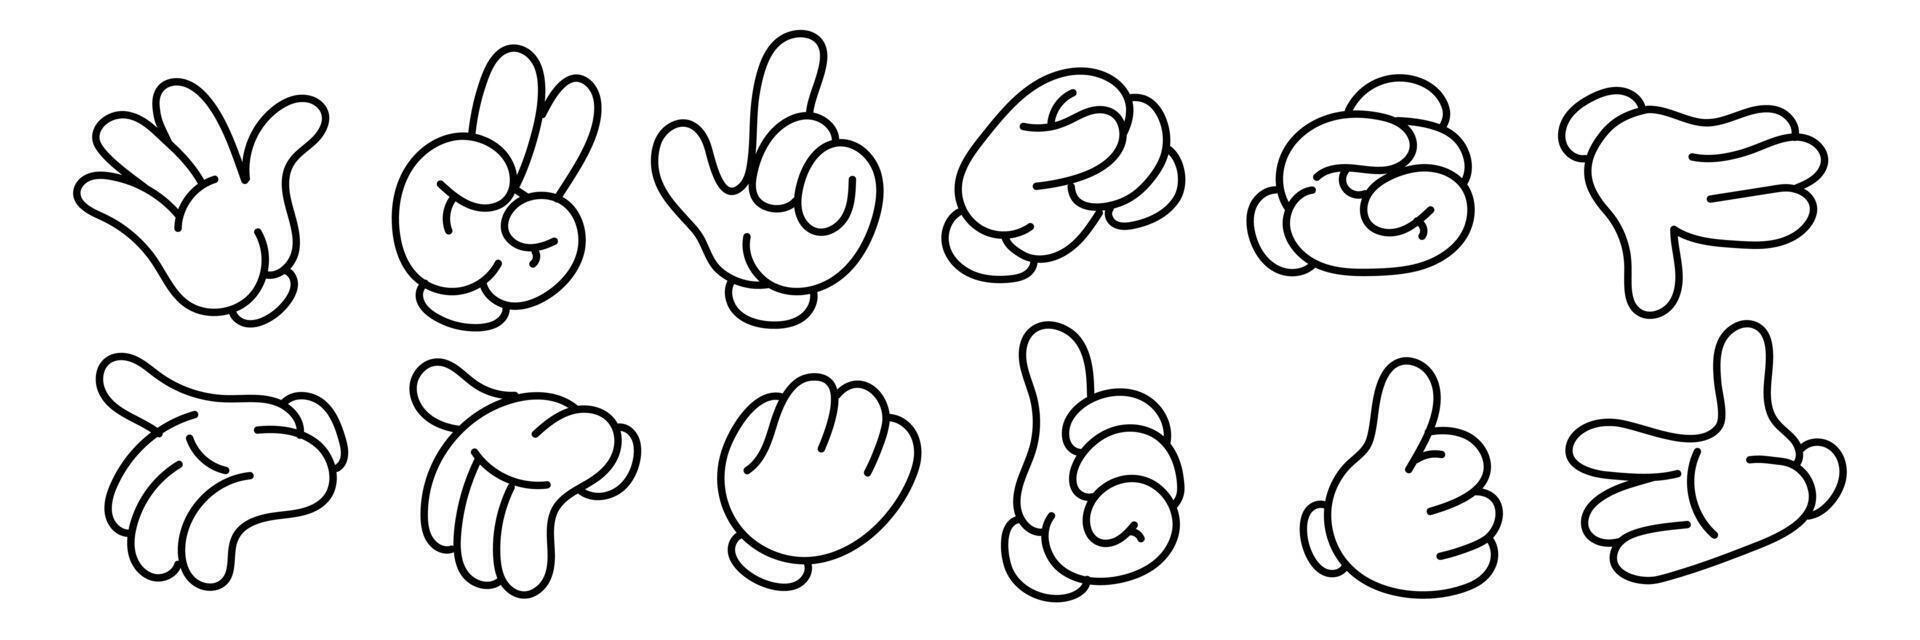 A set of retro gloved hands. A fashionable set of stylish cartoon hands showing various gestures. Toy gloved hands two fingers, three fingers, thumbs up, cool. Funny pointers or icons vector